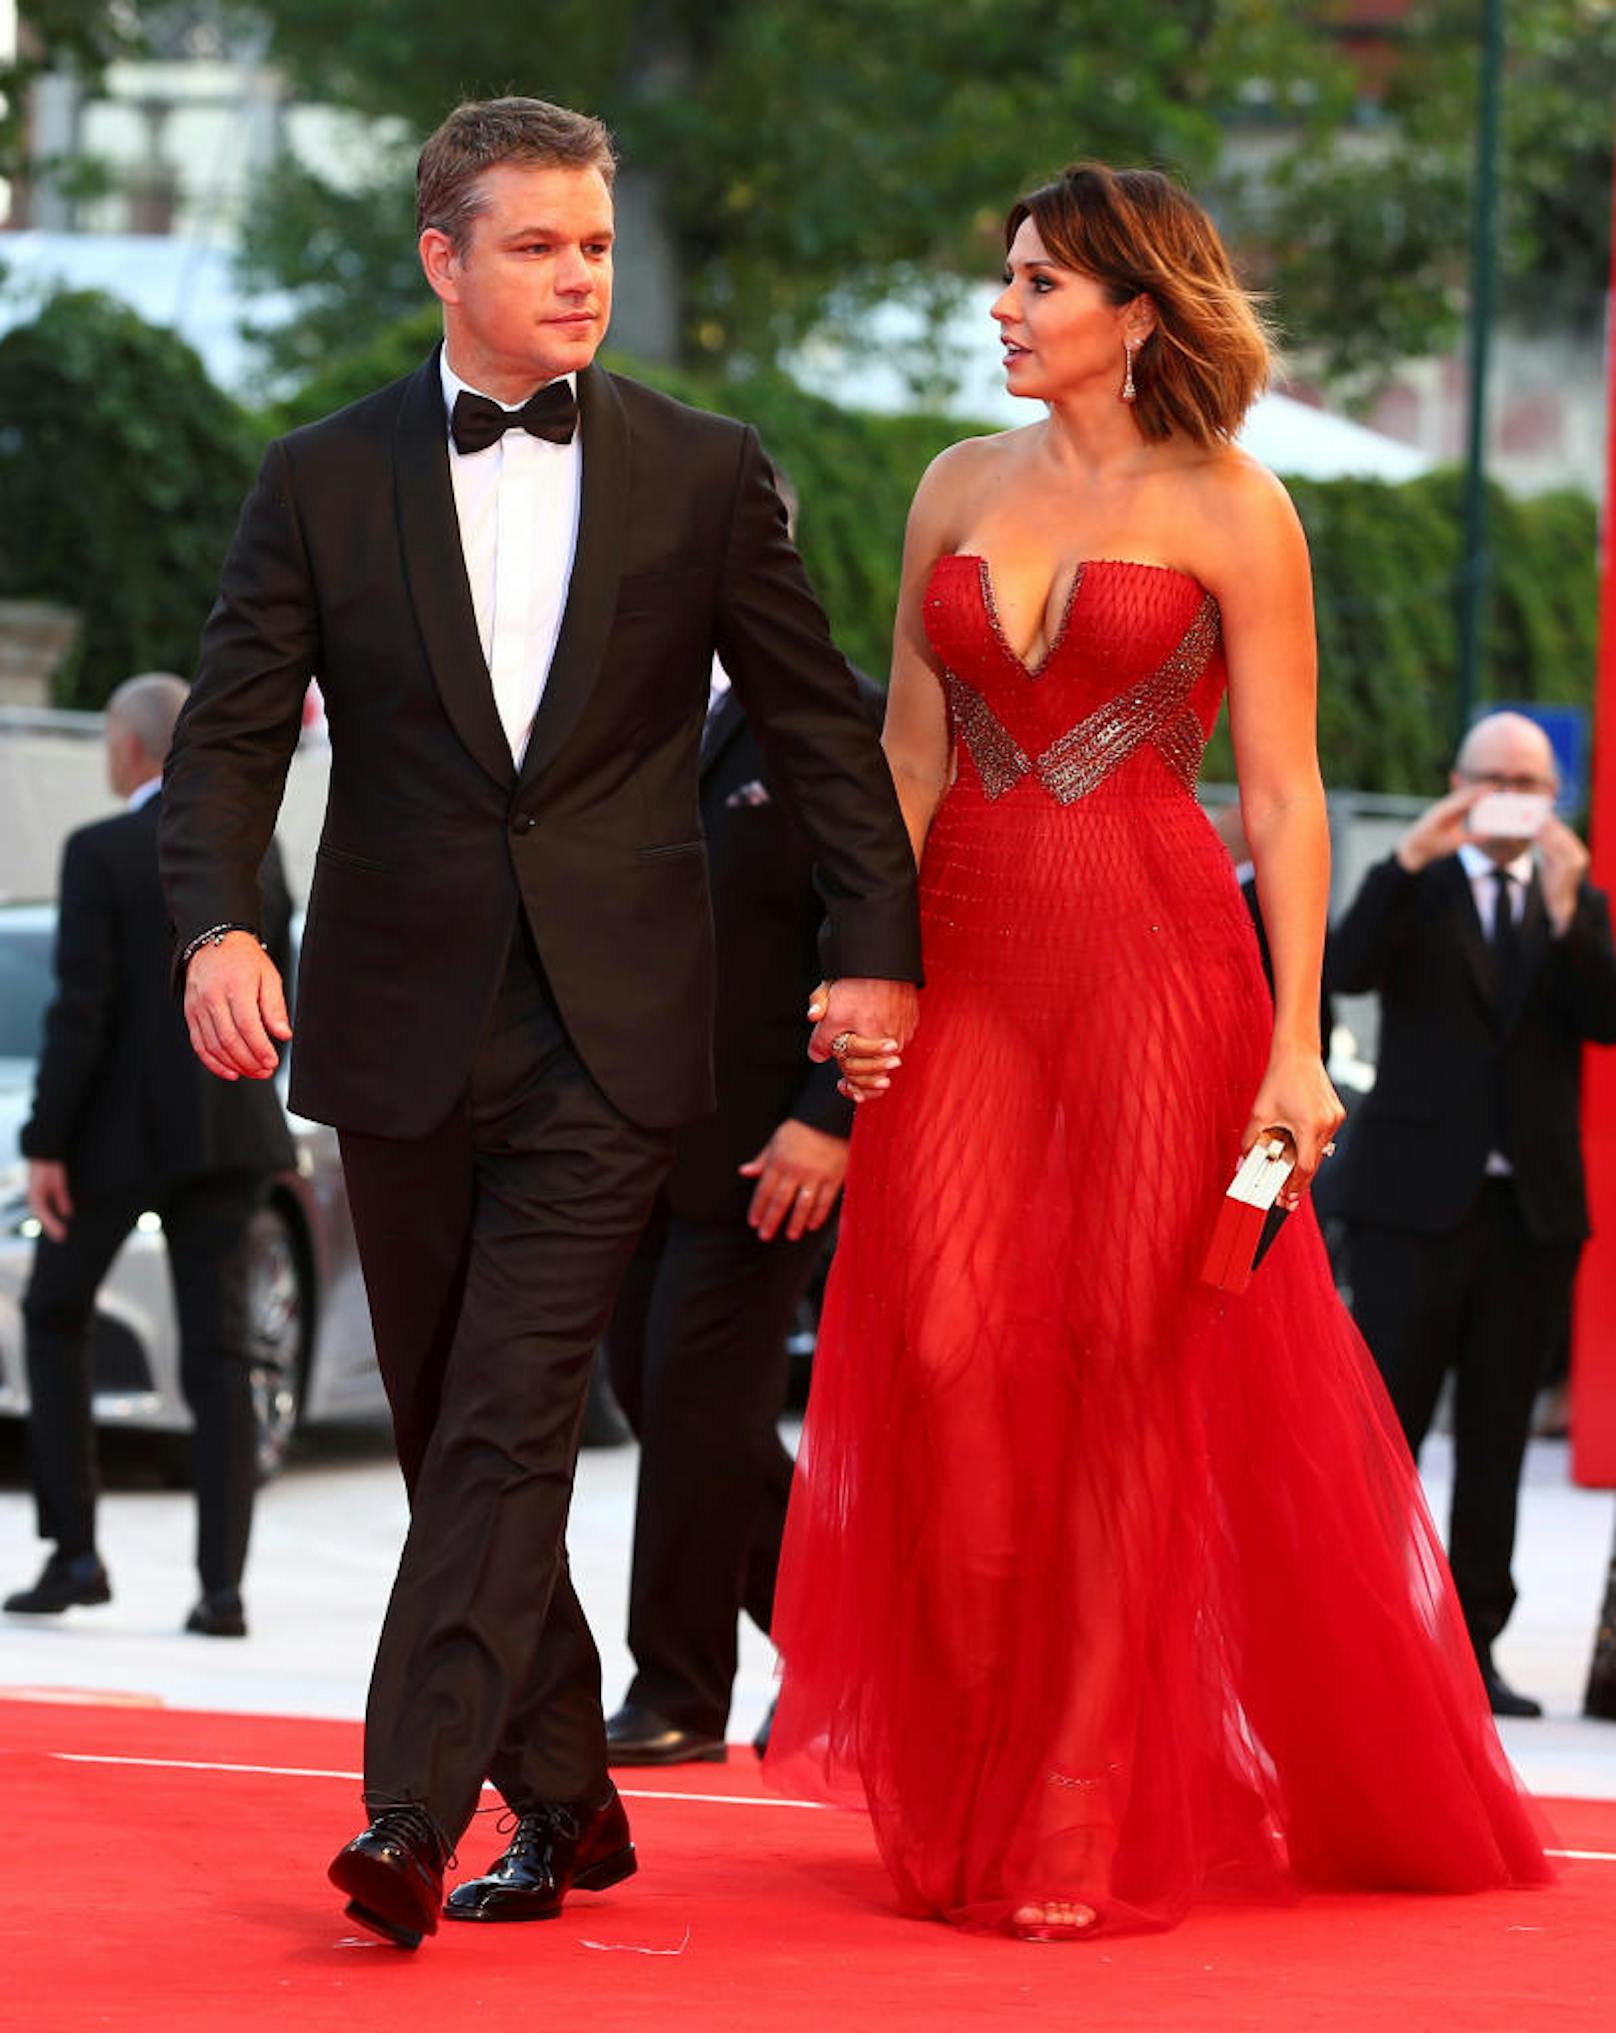 Actor Matt Damon and his wife Luciana pose during a red carpet for the movie "Downsizing" at the 74th Venice Film Festival in Venice, Italy August 30, 2017. REUTERS/Alessandro Bianchi - RC1779918500